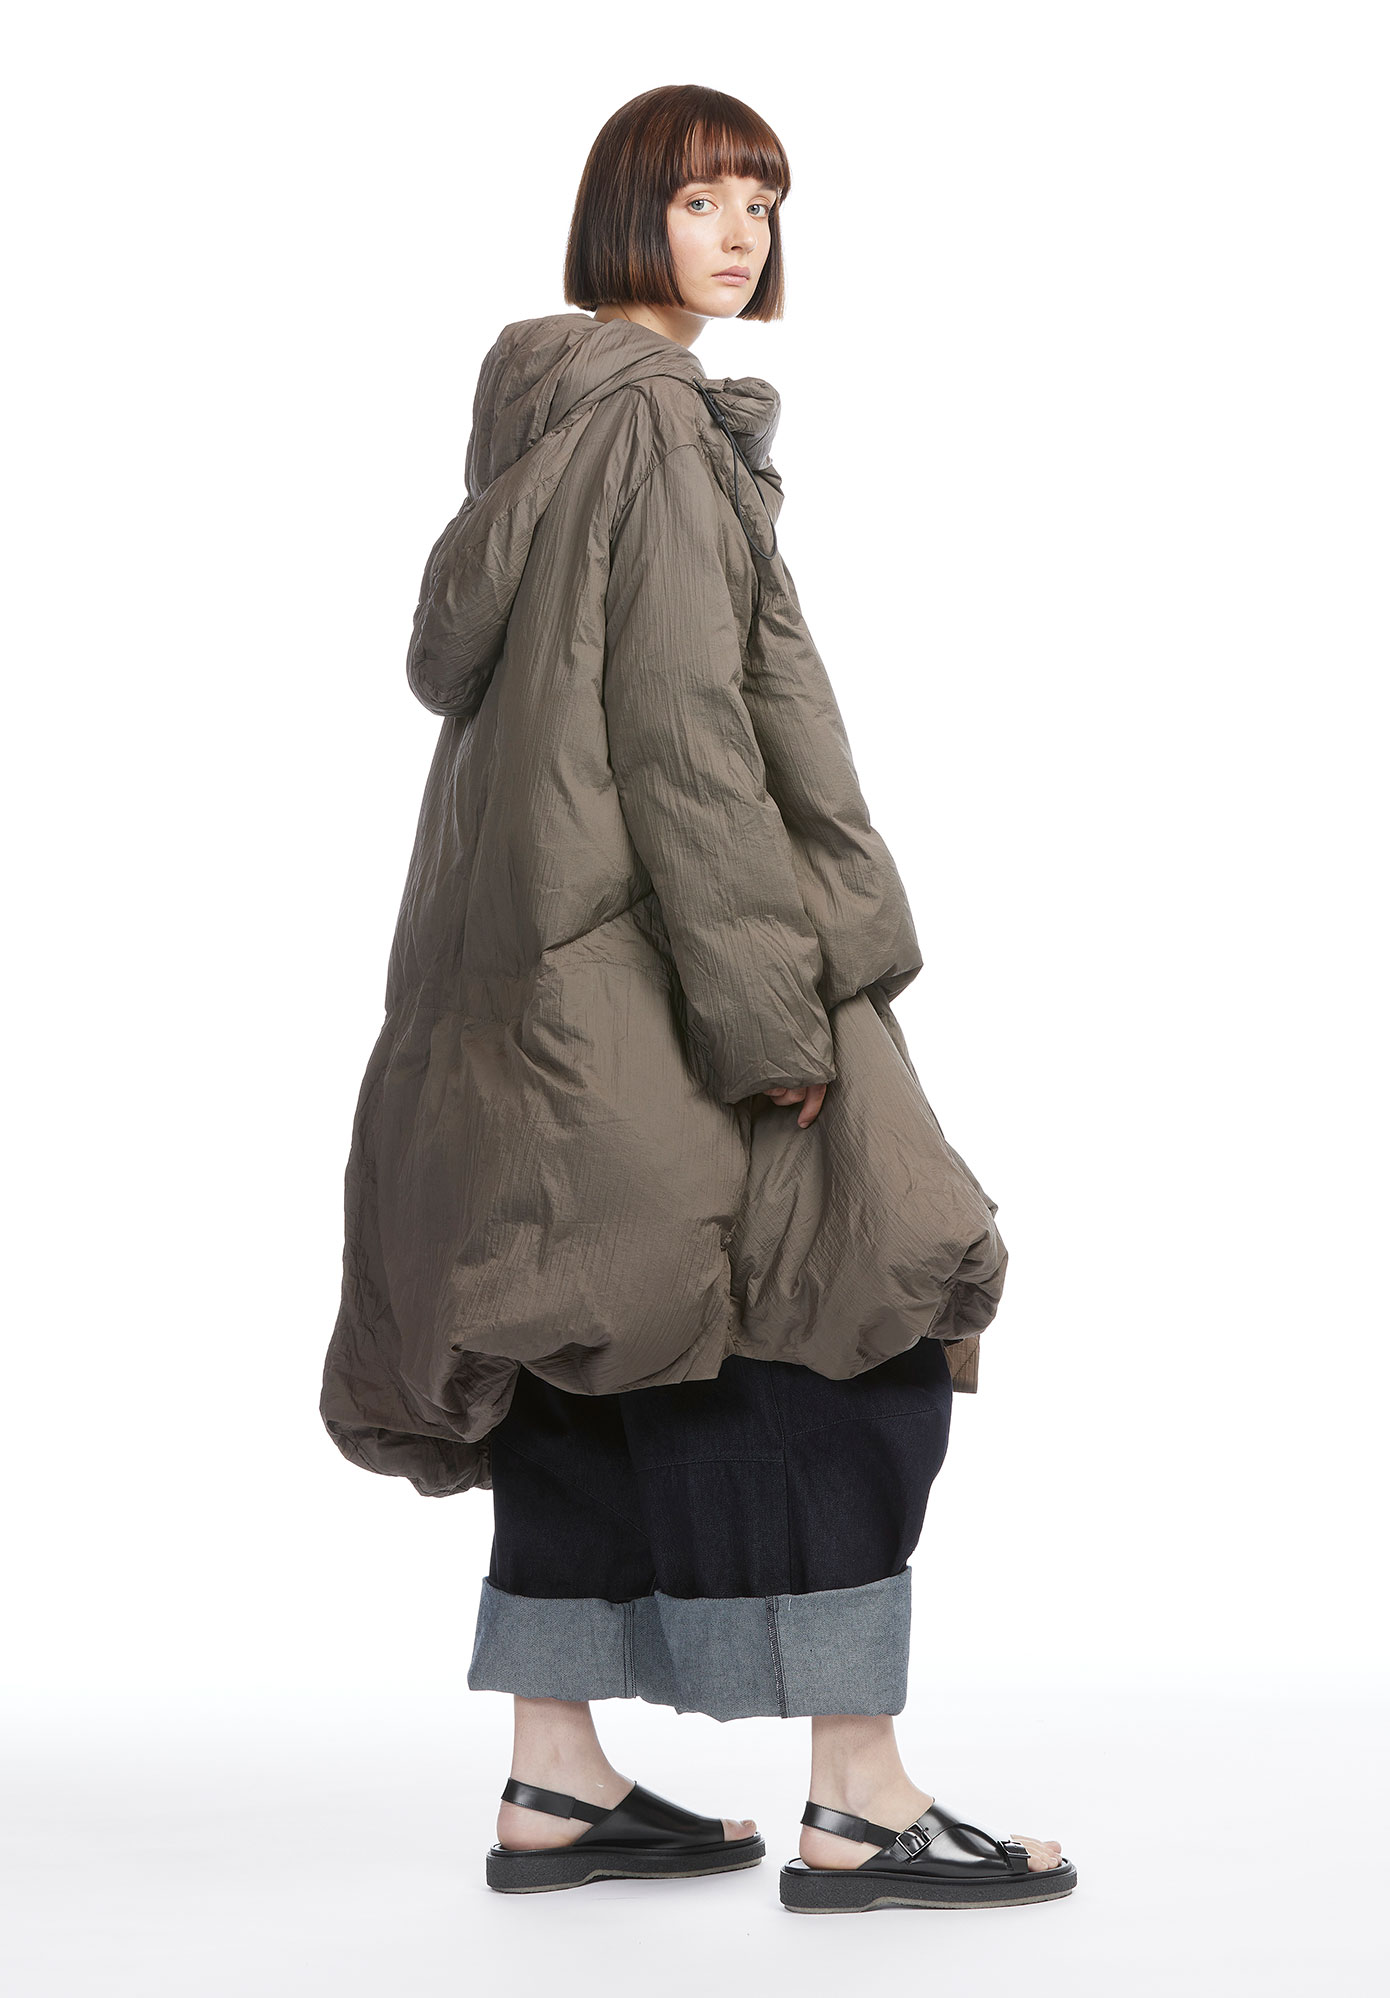 RUNDHOLZ 1001203 PADDED UTILITY PUFFER COAT
Ultra light and soft style puffer jacket in Toffee, featuring goose down and duck feathers transform shape with drawcords from long to short.
Model also wears
Studio Rundholz 1080121 Mainline Raw Denim Deep Cuff Trouser Wide Leg
Adieu Paris TYPE 140 Sandal in Black
Pieces featured are from Autumn Winter collection
Full length left sideview of model with jacket worn long